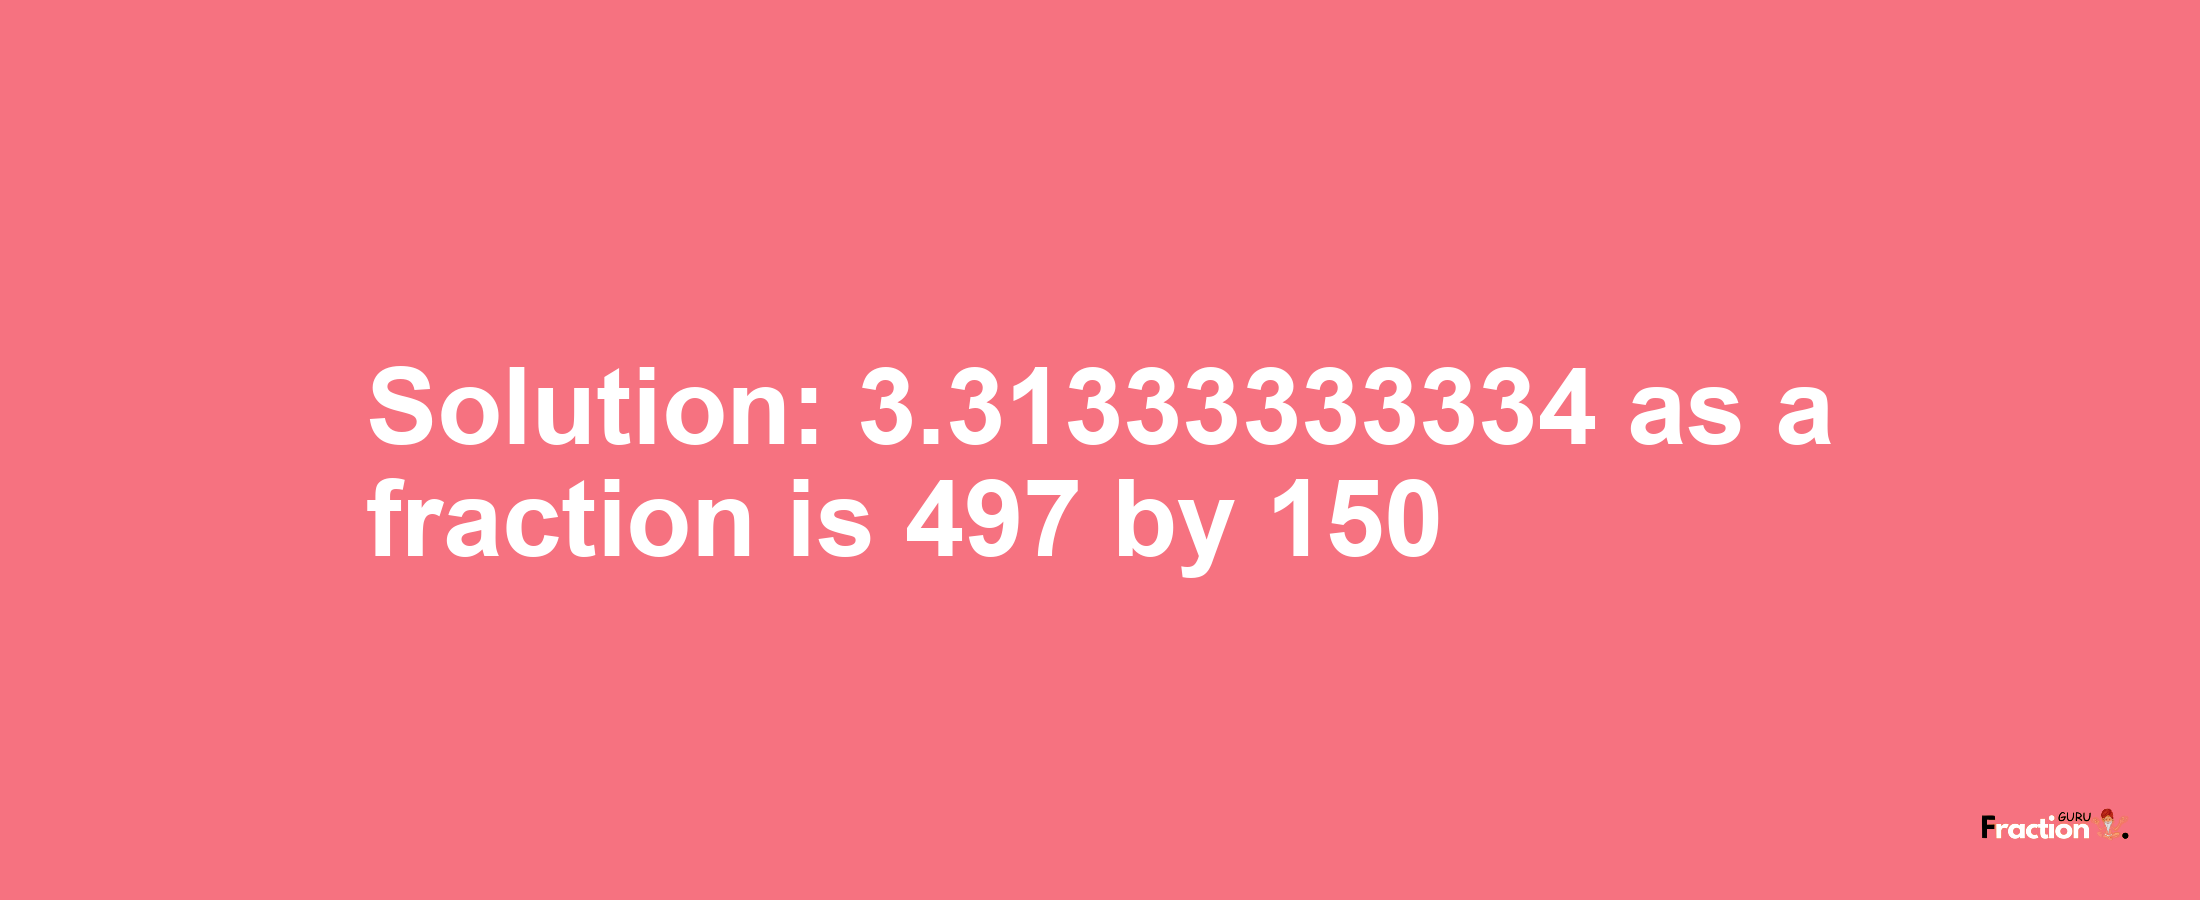 Solution:3.31333333334 as a fraction is 497/150